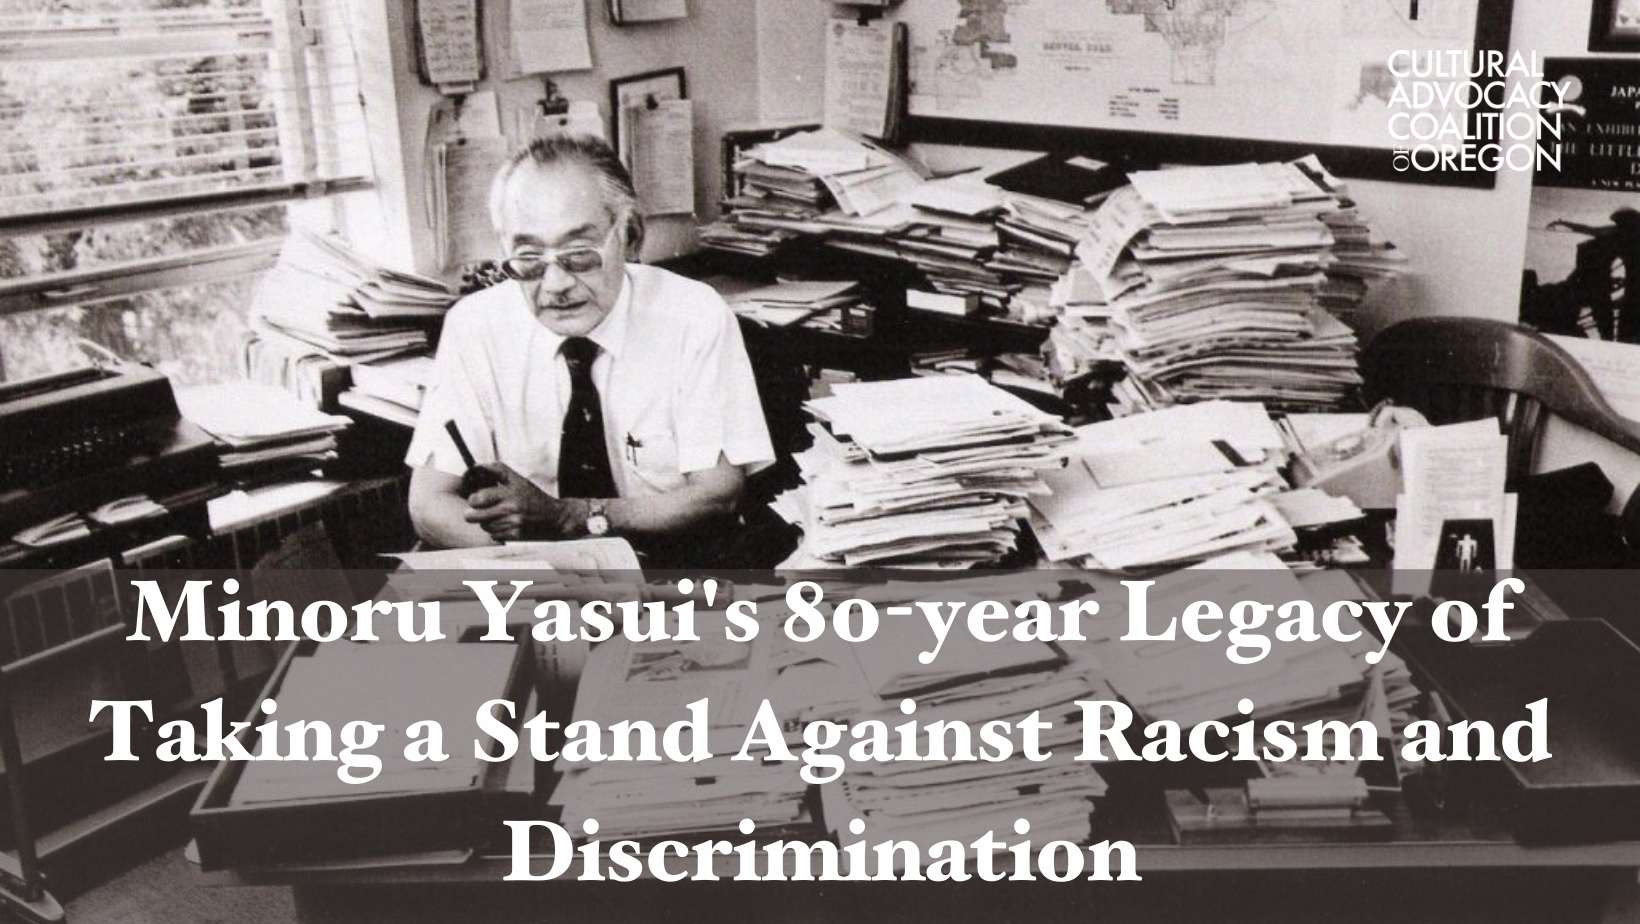 Minoru Yasui: An 80-year Legacy of Taking a Stand Against Racism and Discrimination